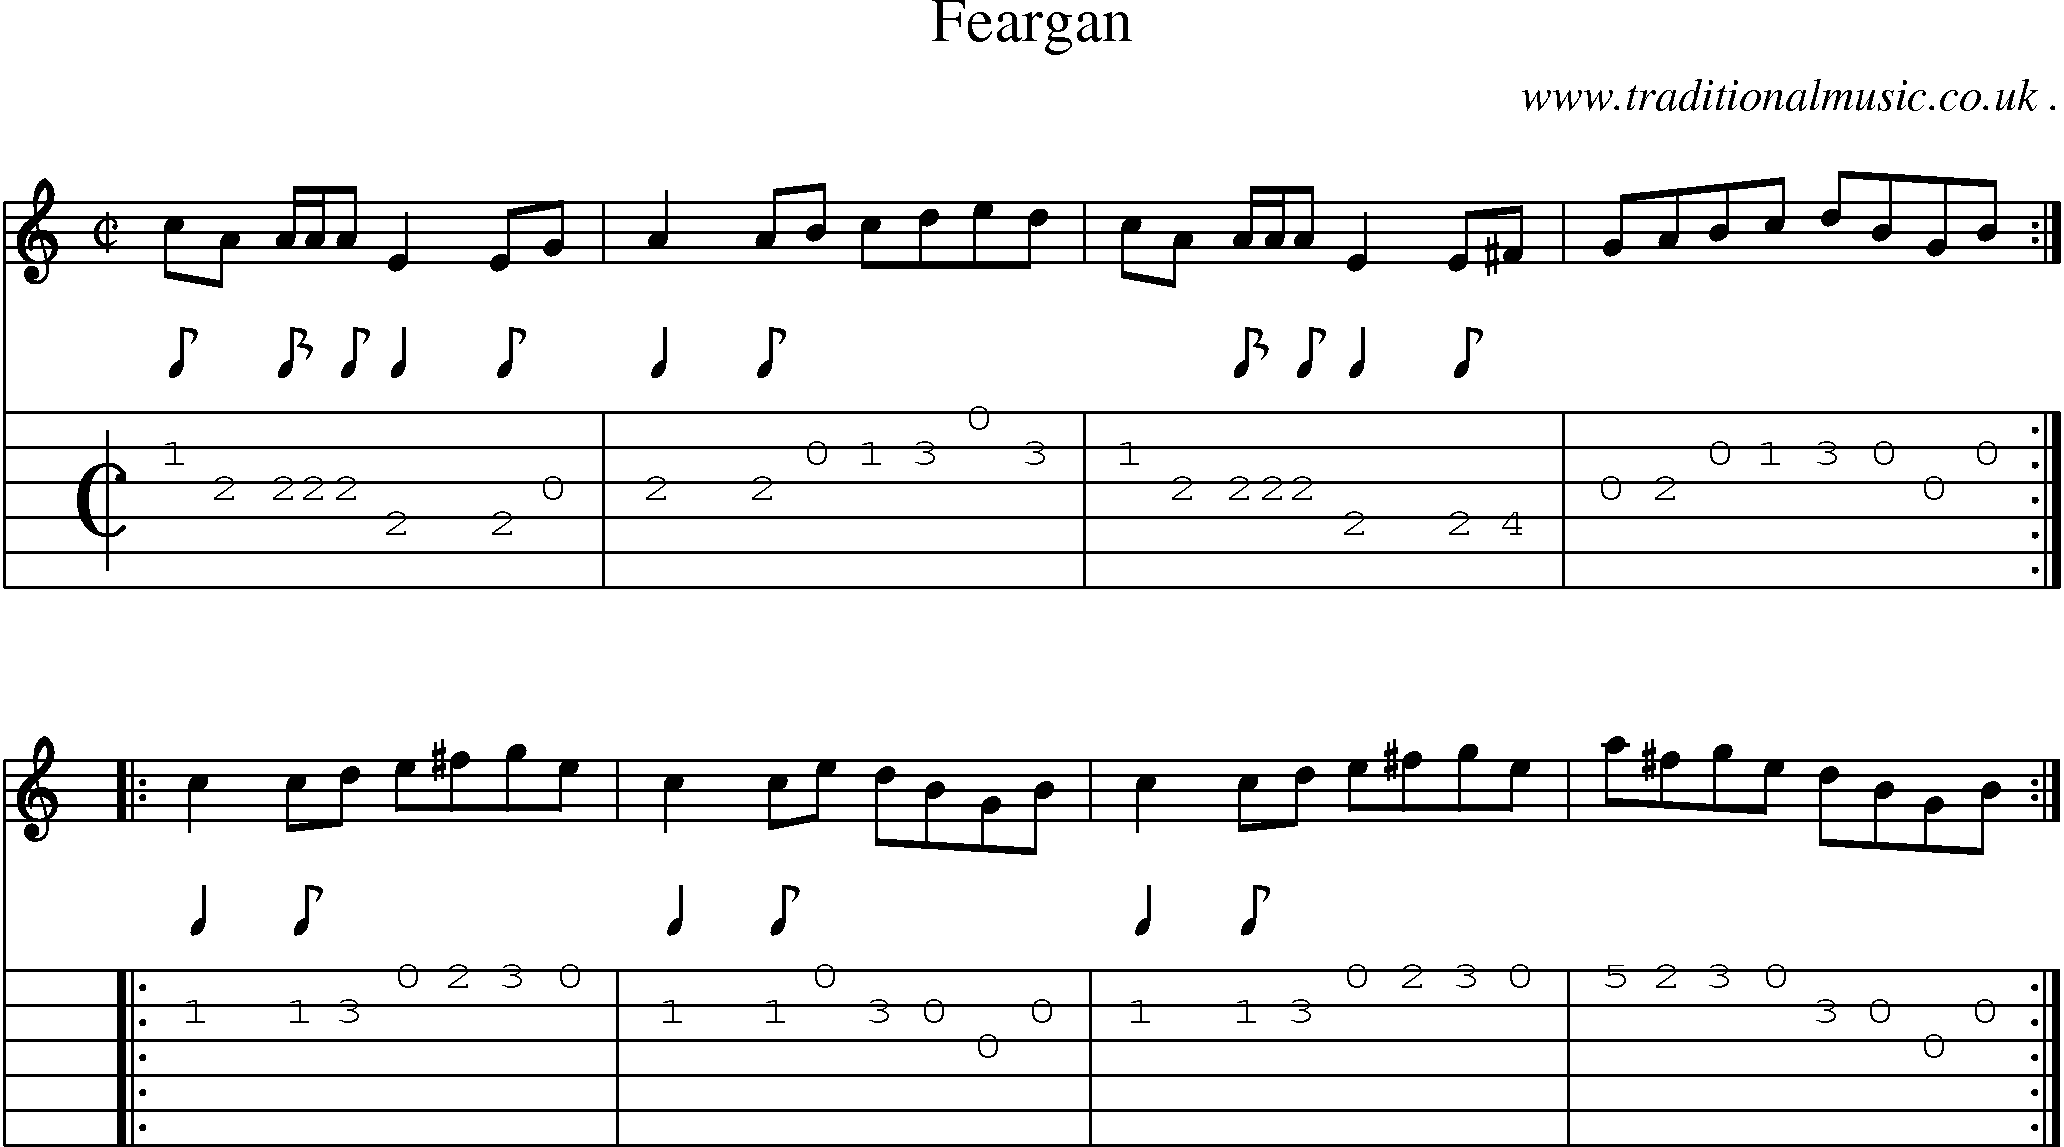 Sheet-music  score, Chords and Guitar Tabs for Feargan